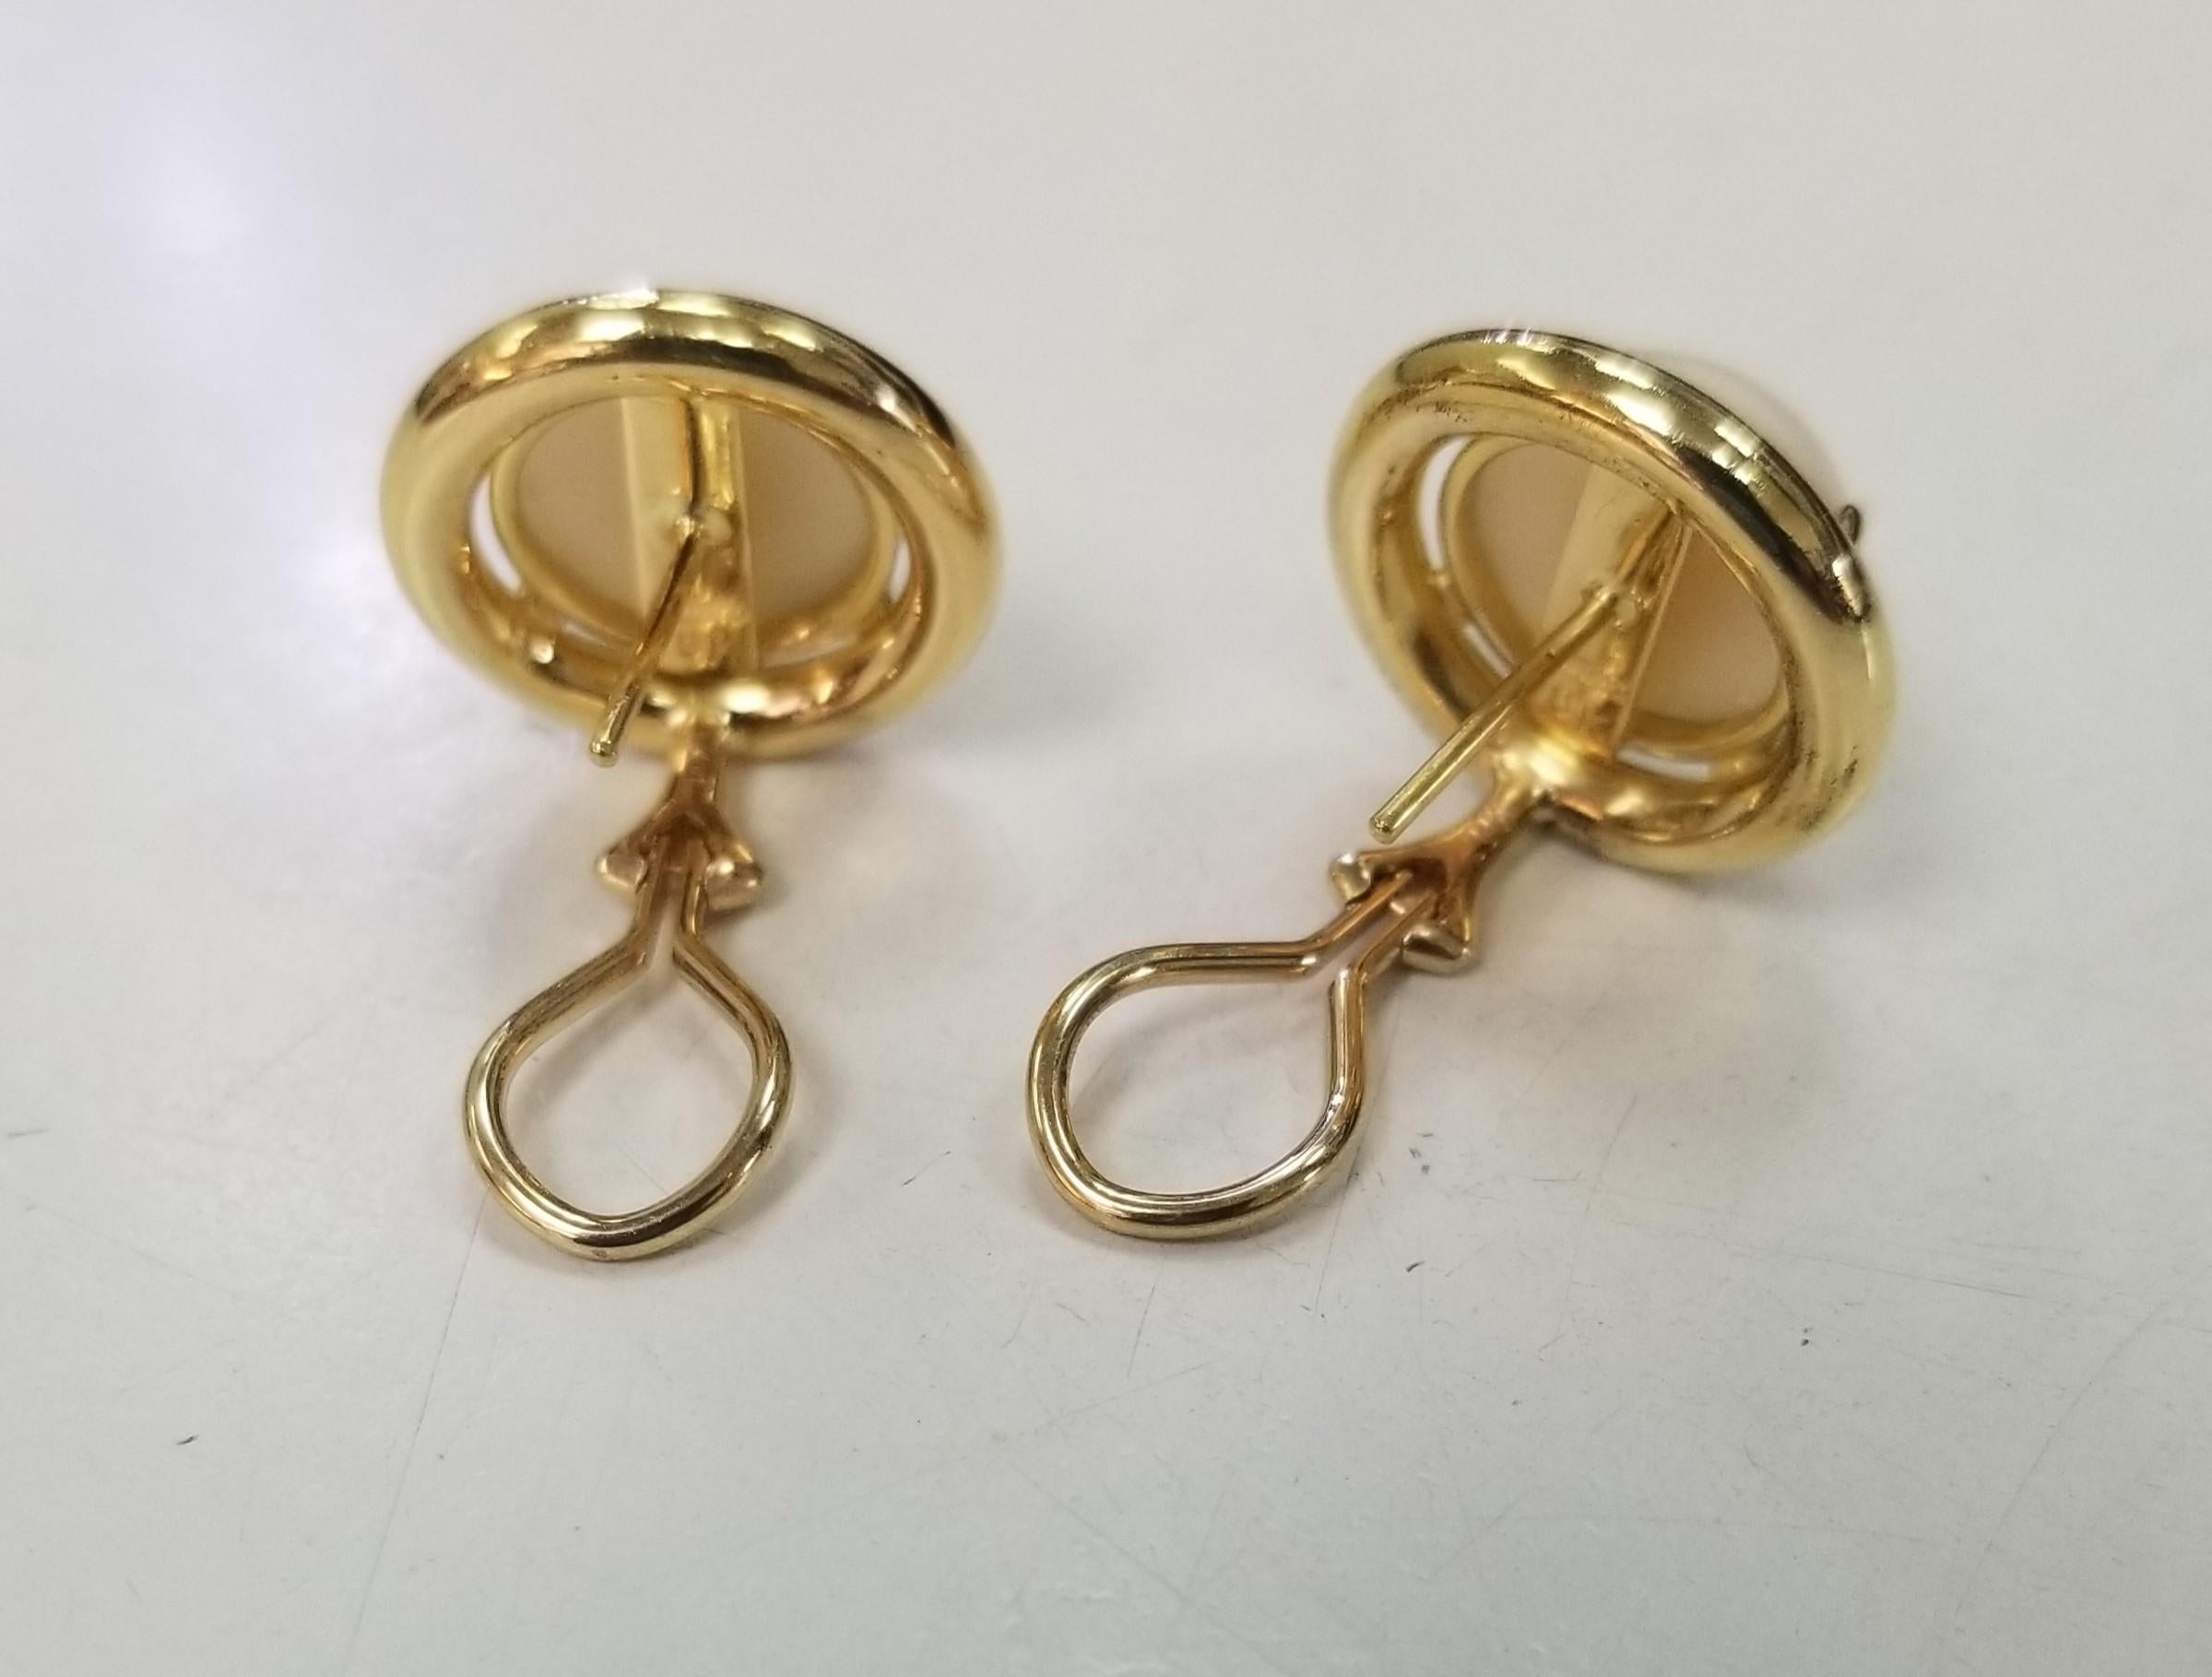 Seller Notes: “IN VERY GOOD CONDITION”
Style: Lever Back, Clip, Hoop, Huggie
Base Metal: 18K Yellow Gold
Type :Earrings
Main Stone Color: White Coral
Metal Purity: 18k
Closure: Lever Back
Metal: Yellow Gold
Brand: GUMP'S

*Matching Bracelet,